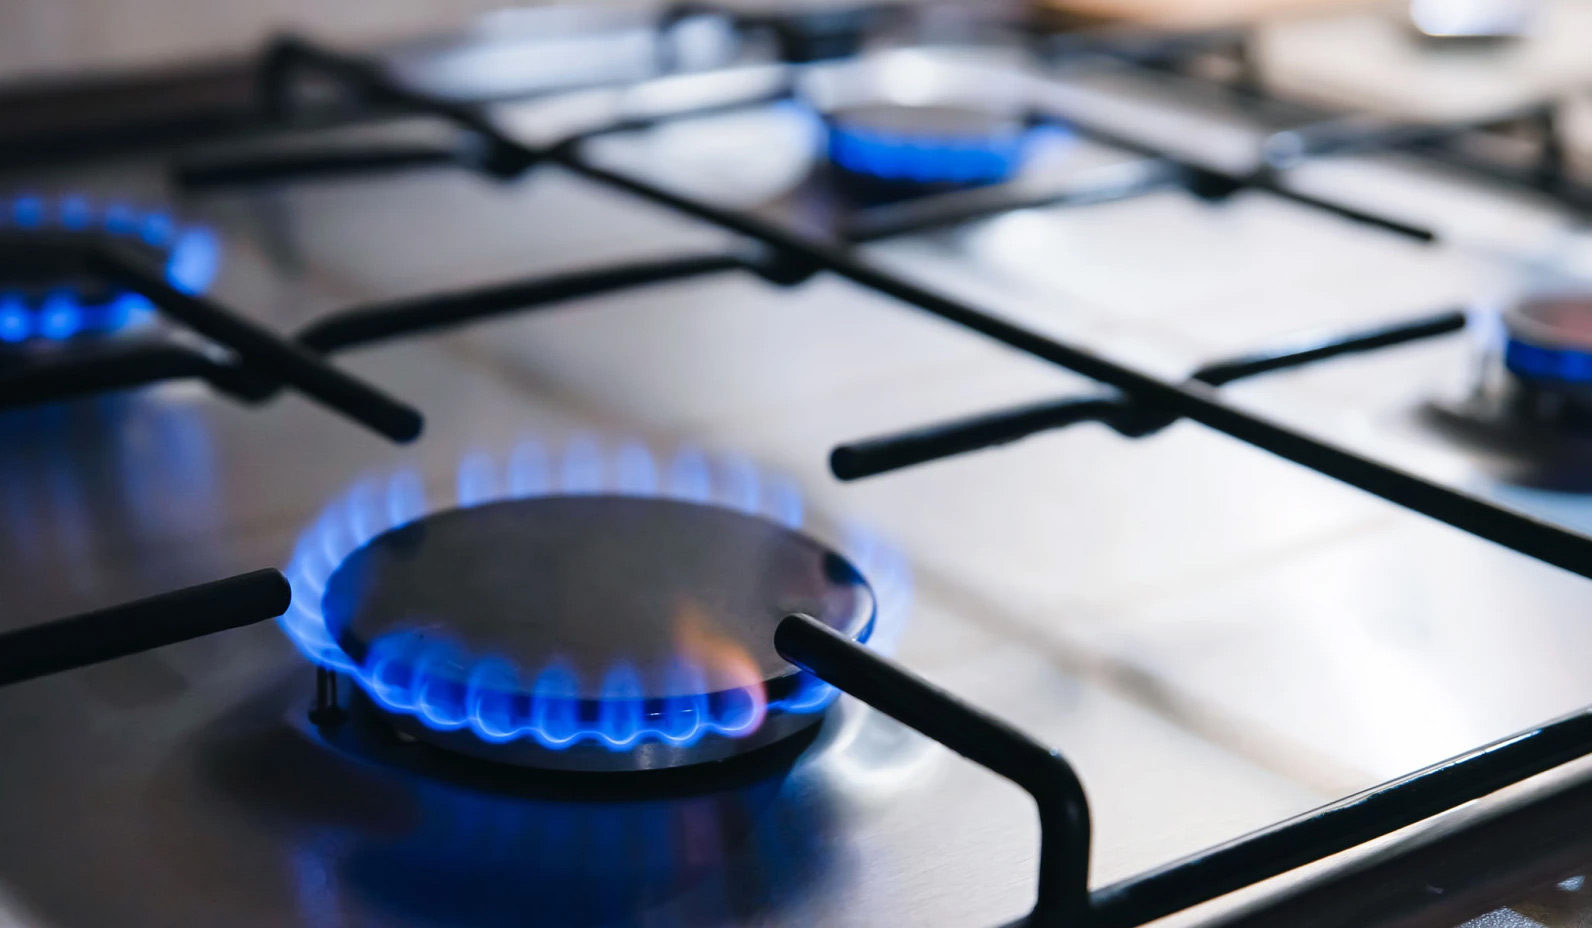 Biden Administration Considers Banning Gas Stoves over Health Concerns